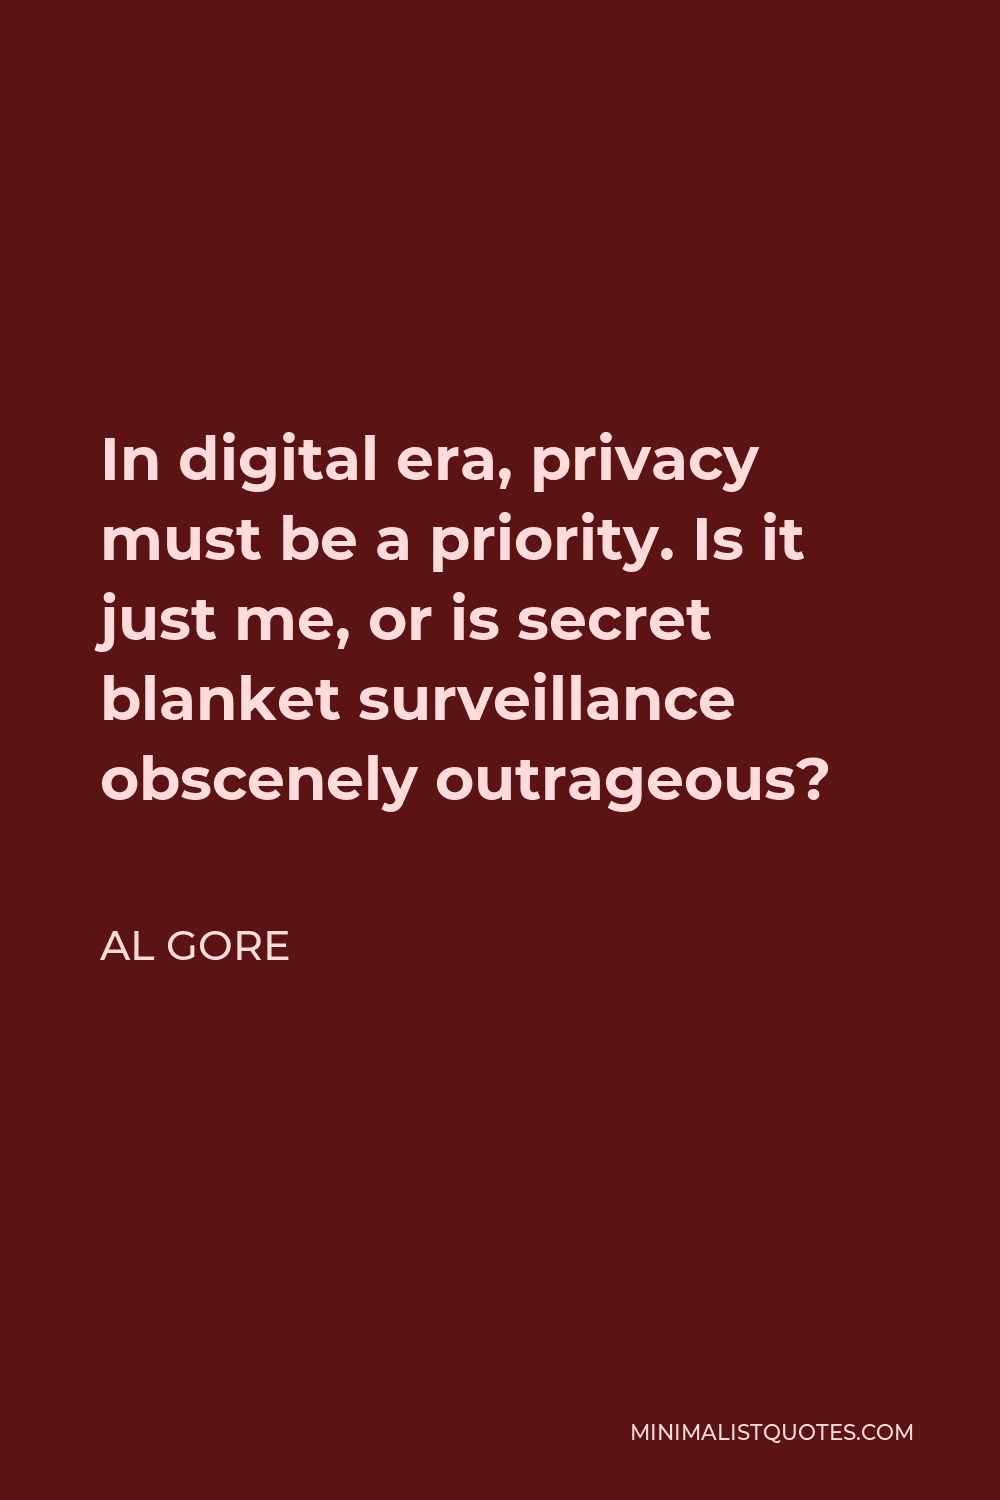 Al Gore Quote - In digital era, privacy must be a priority. Is it just me, or is secret blanket surveillance obscenely outrageous?